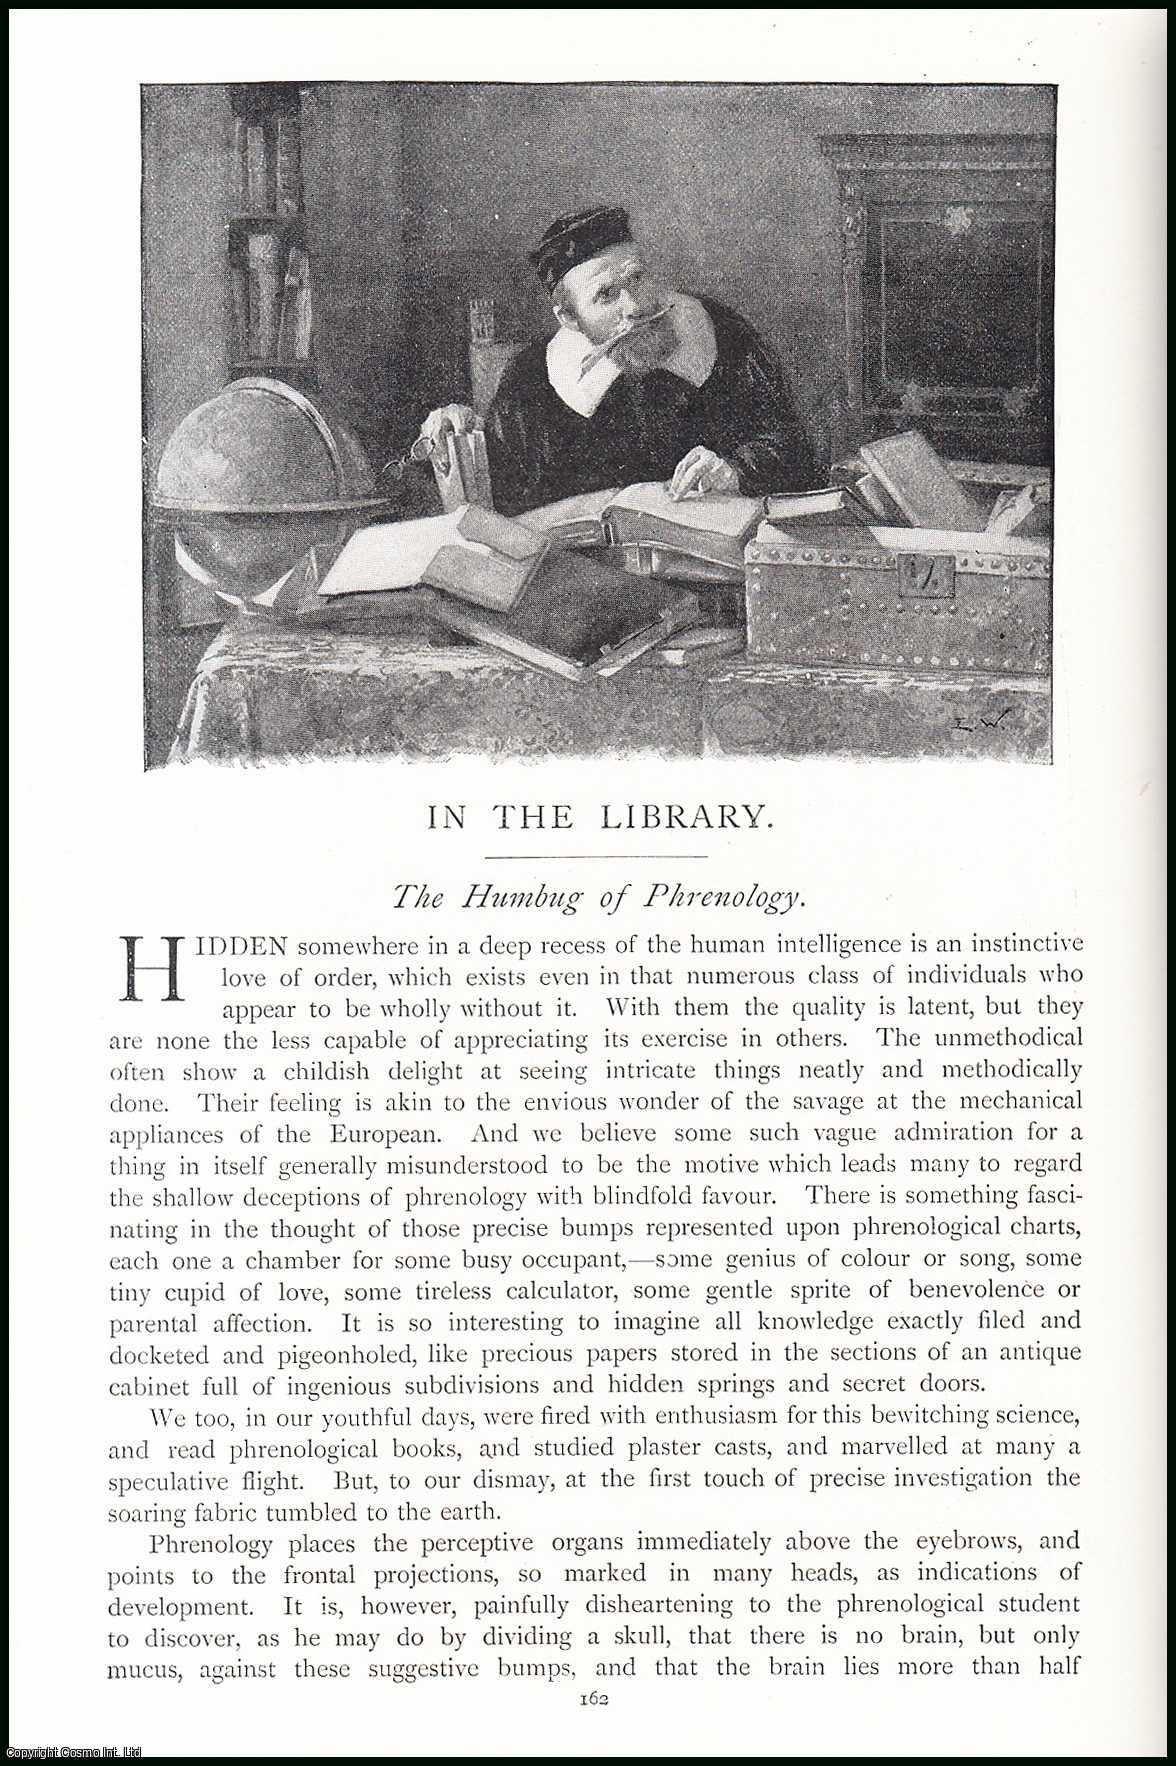 W.W.A. - The Humbug of Phrenology : Humanity - Past and Future & Life in the Southern Confederacy. In the Library. An uncommon original article from the Pall Mall Magazine, 1894.